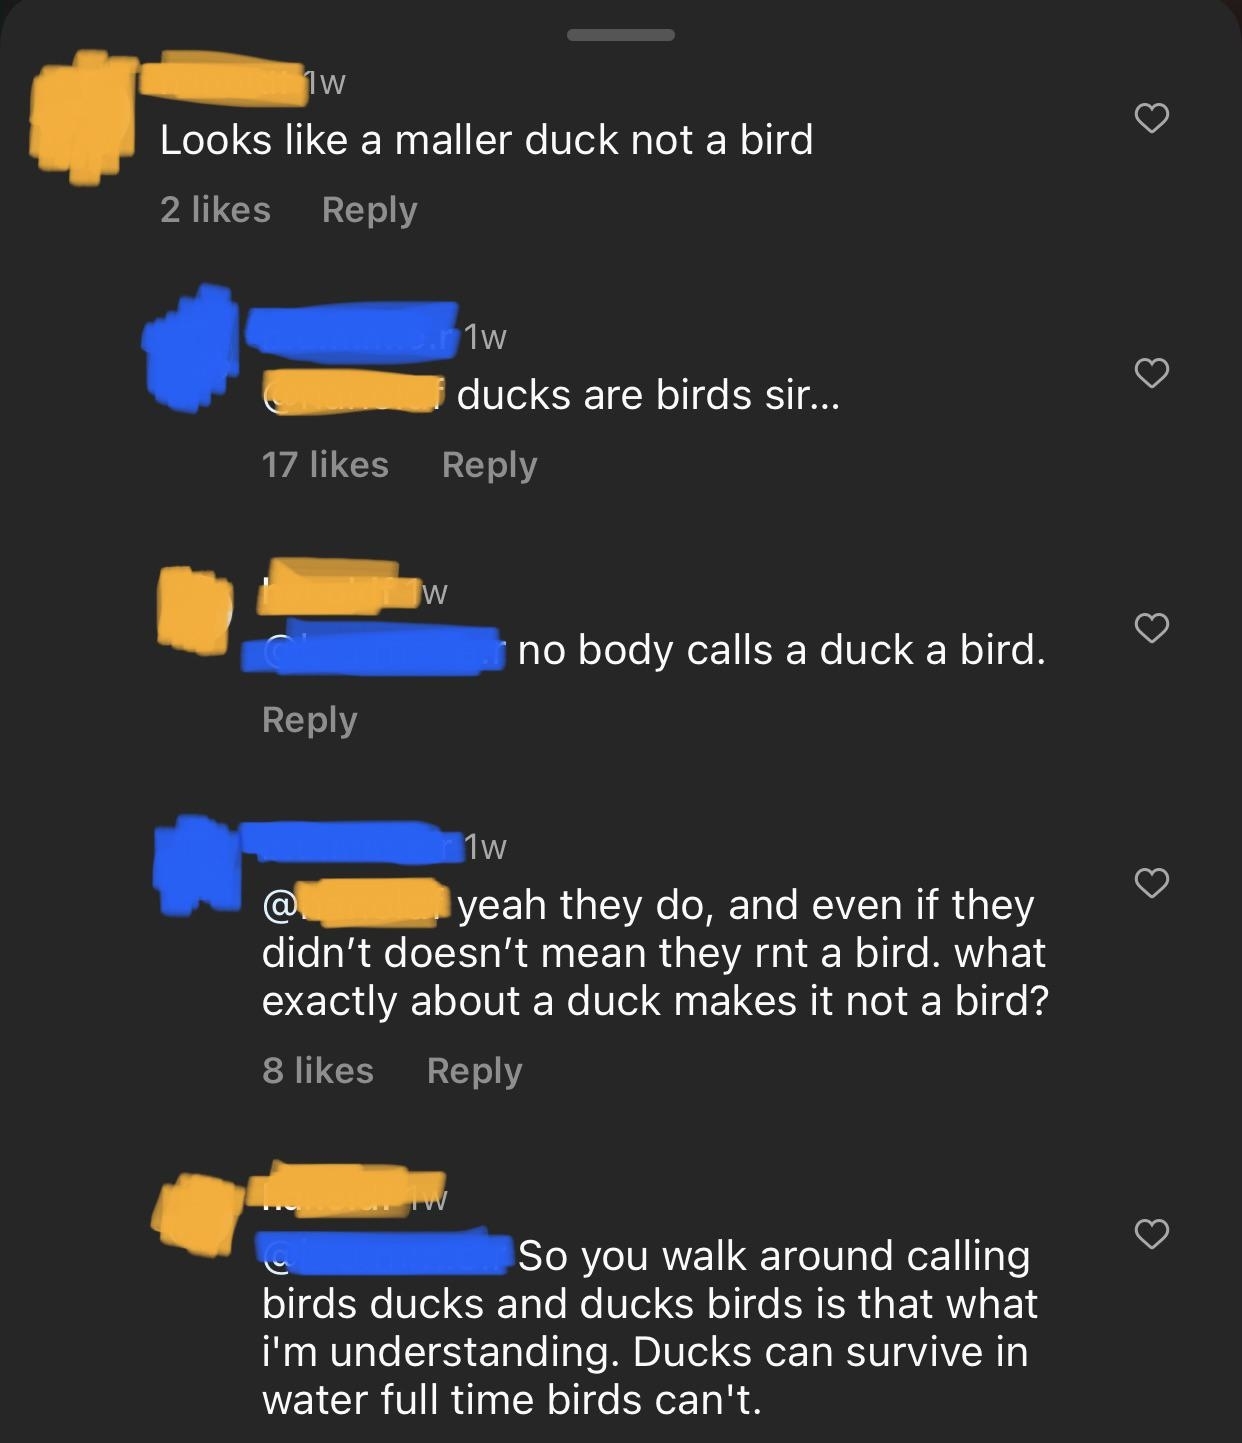 Argument about how no one calls ducks birds and whether or not they are, in fact, birds, with the final comment: &quot;Ducks can survive in water full time, birds can&#x27;t&quot;